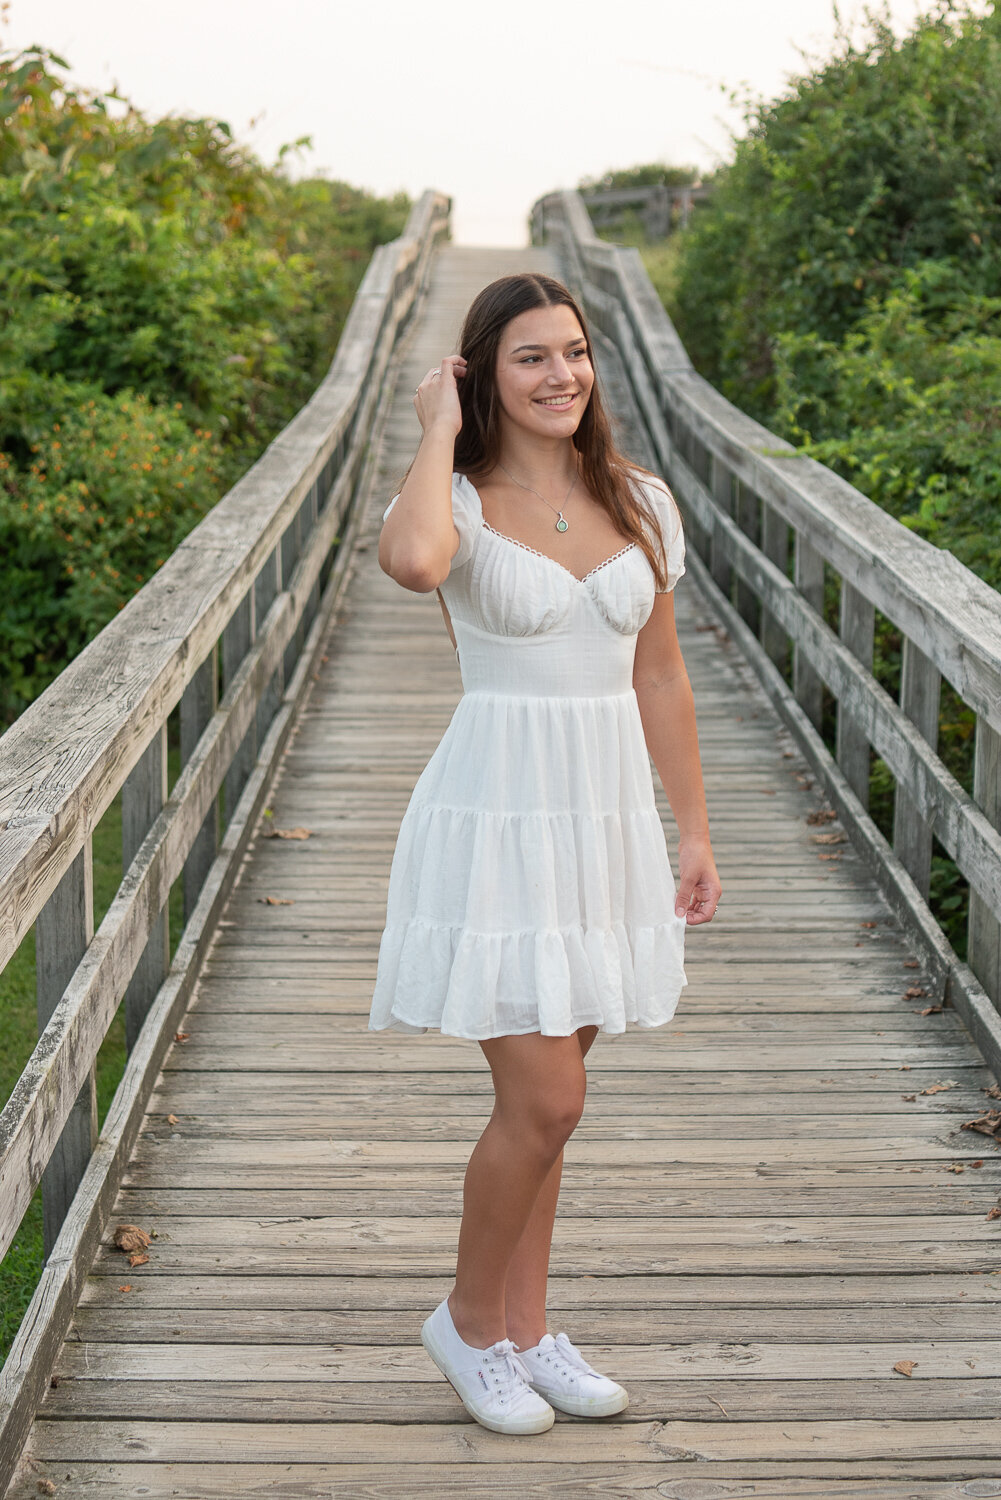 Young woman in white dress standing on board walk at Harkness Park for senior photography session |Sharon Leger Photography | Canton, CT Newborn & Family Photographer